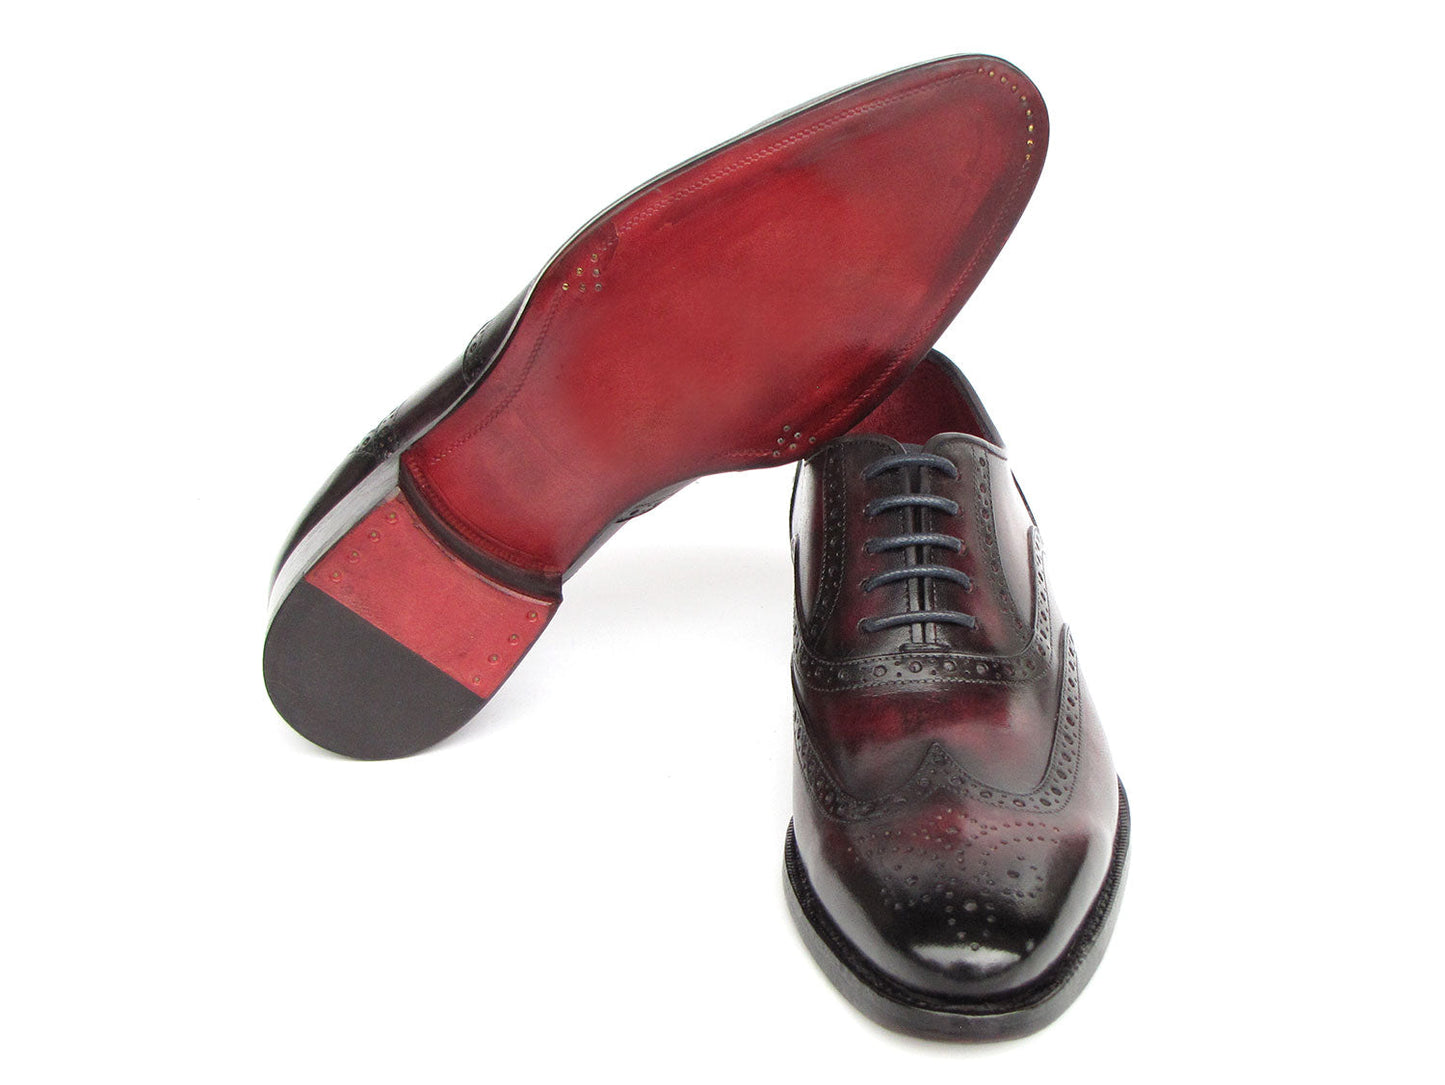 Paul Parkman Bordeaux Burnished Goodyear Welted Wingtip Oxford Shoes (ID#66BRD94)